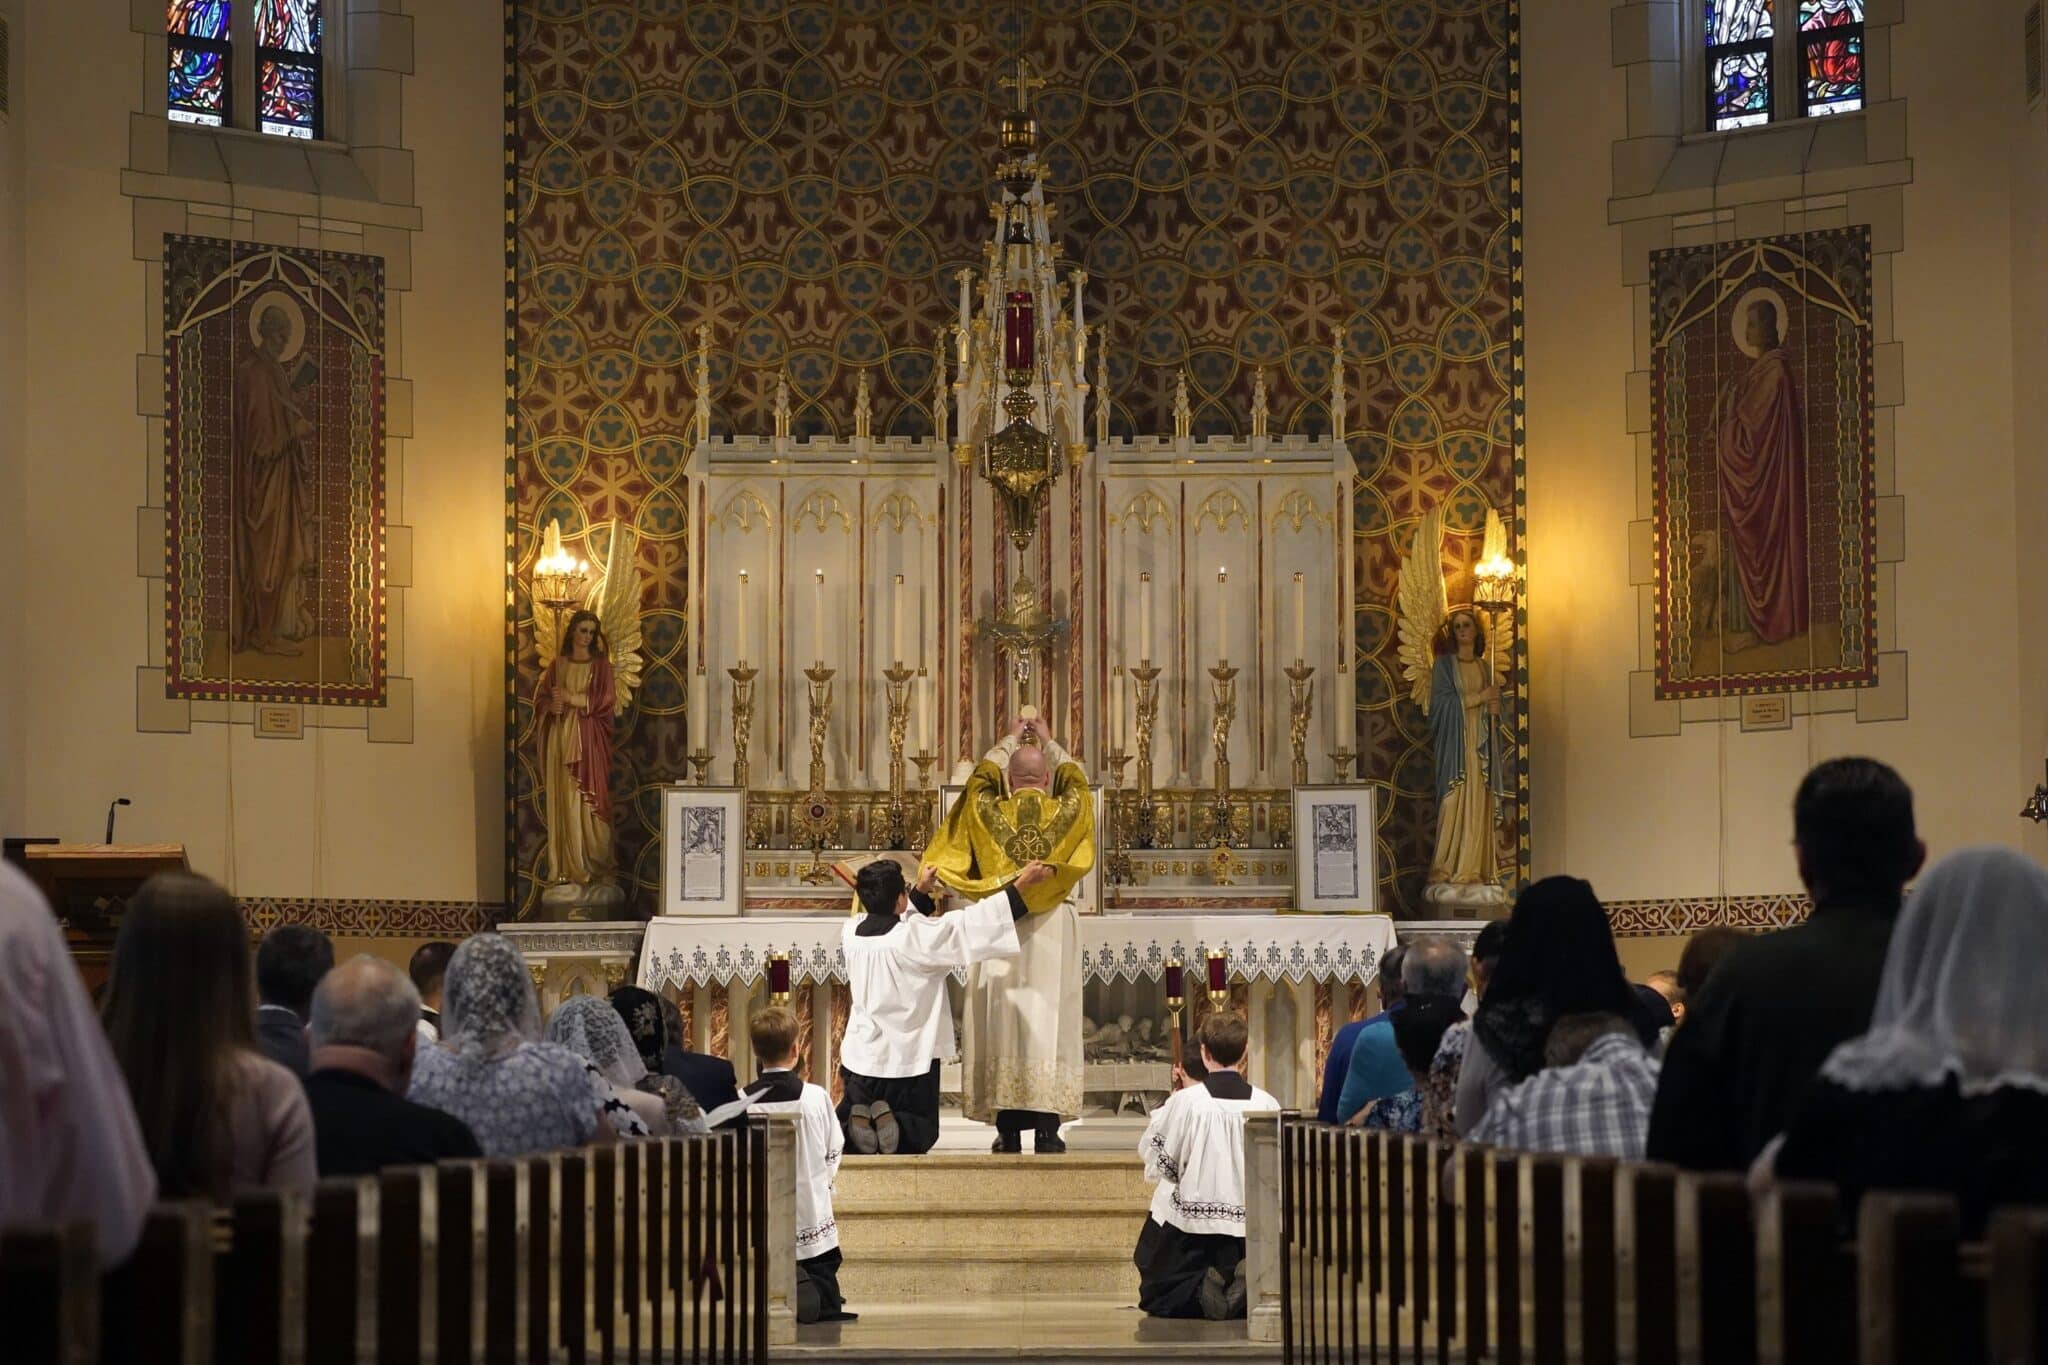 Father Stephen Saffron, parish administrator, elevates the Eucharist during a Tridentine Mass at St. Josaphat Church in the Queens borough of New York City in this July 18, 2021, file photo. The Vatican's Congregation for Divine Worship and the Sacraments has responded to bishops' questions about Pope Francis' July document limiting use of pre-Vatican II Mass. Among the clarifications was that confirmations and ordinations are not permitted to be celebrated according to the older rites. (CNS photo/Gregory A. Shemitz)